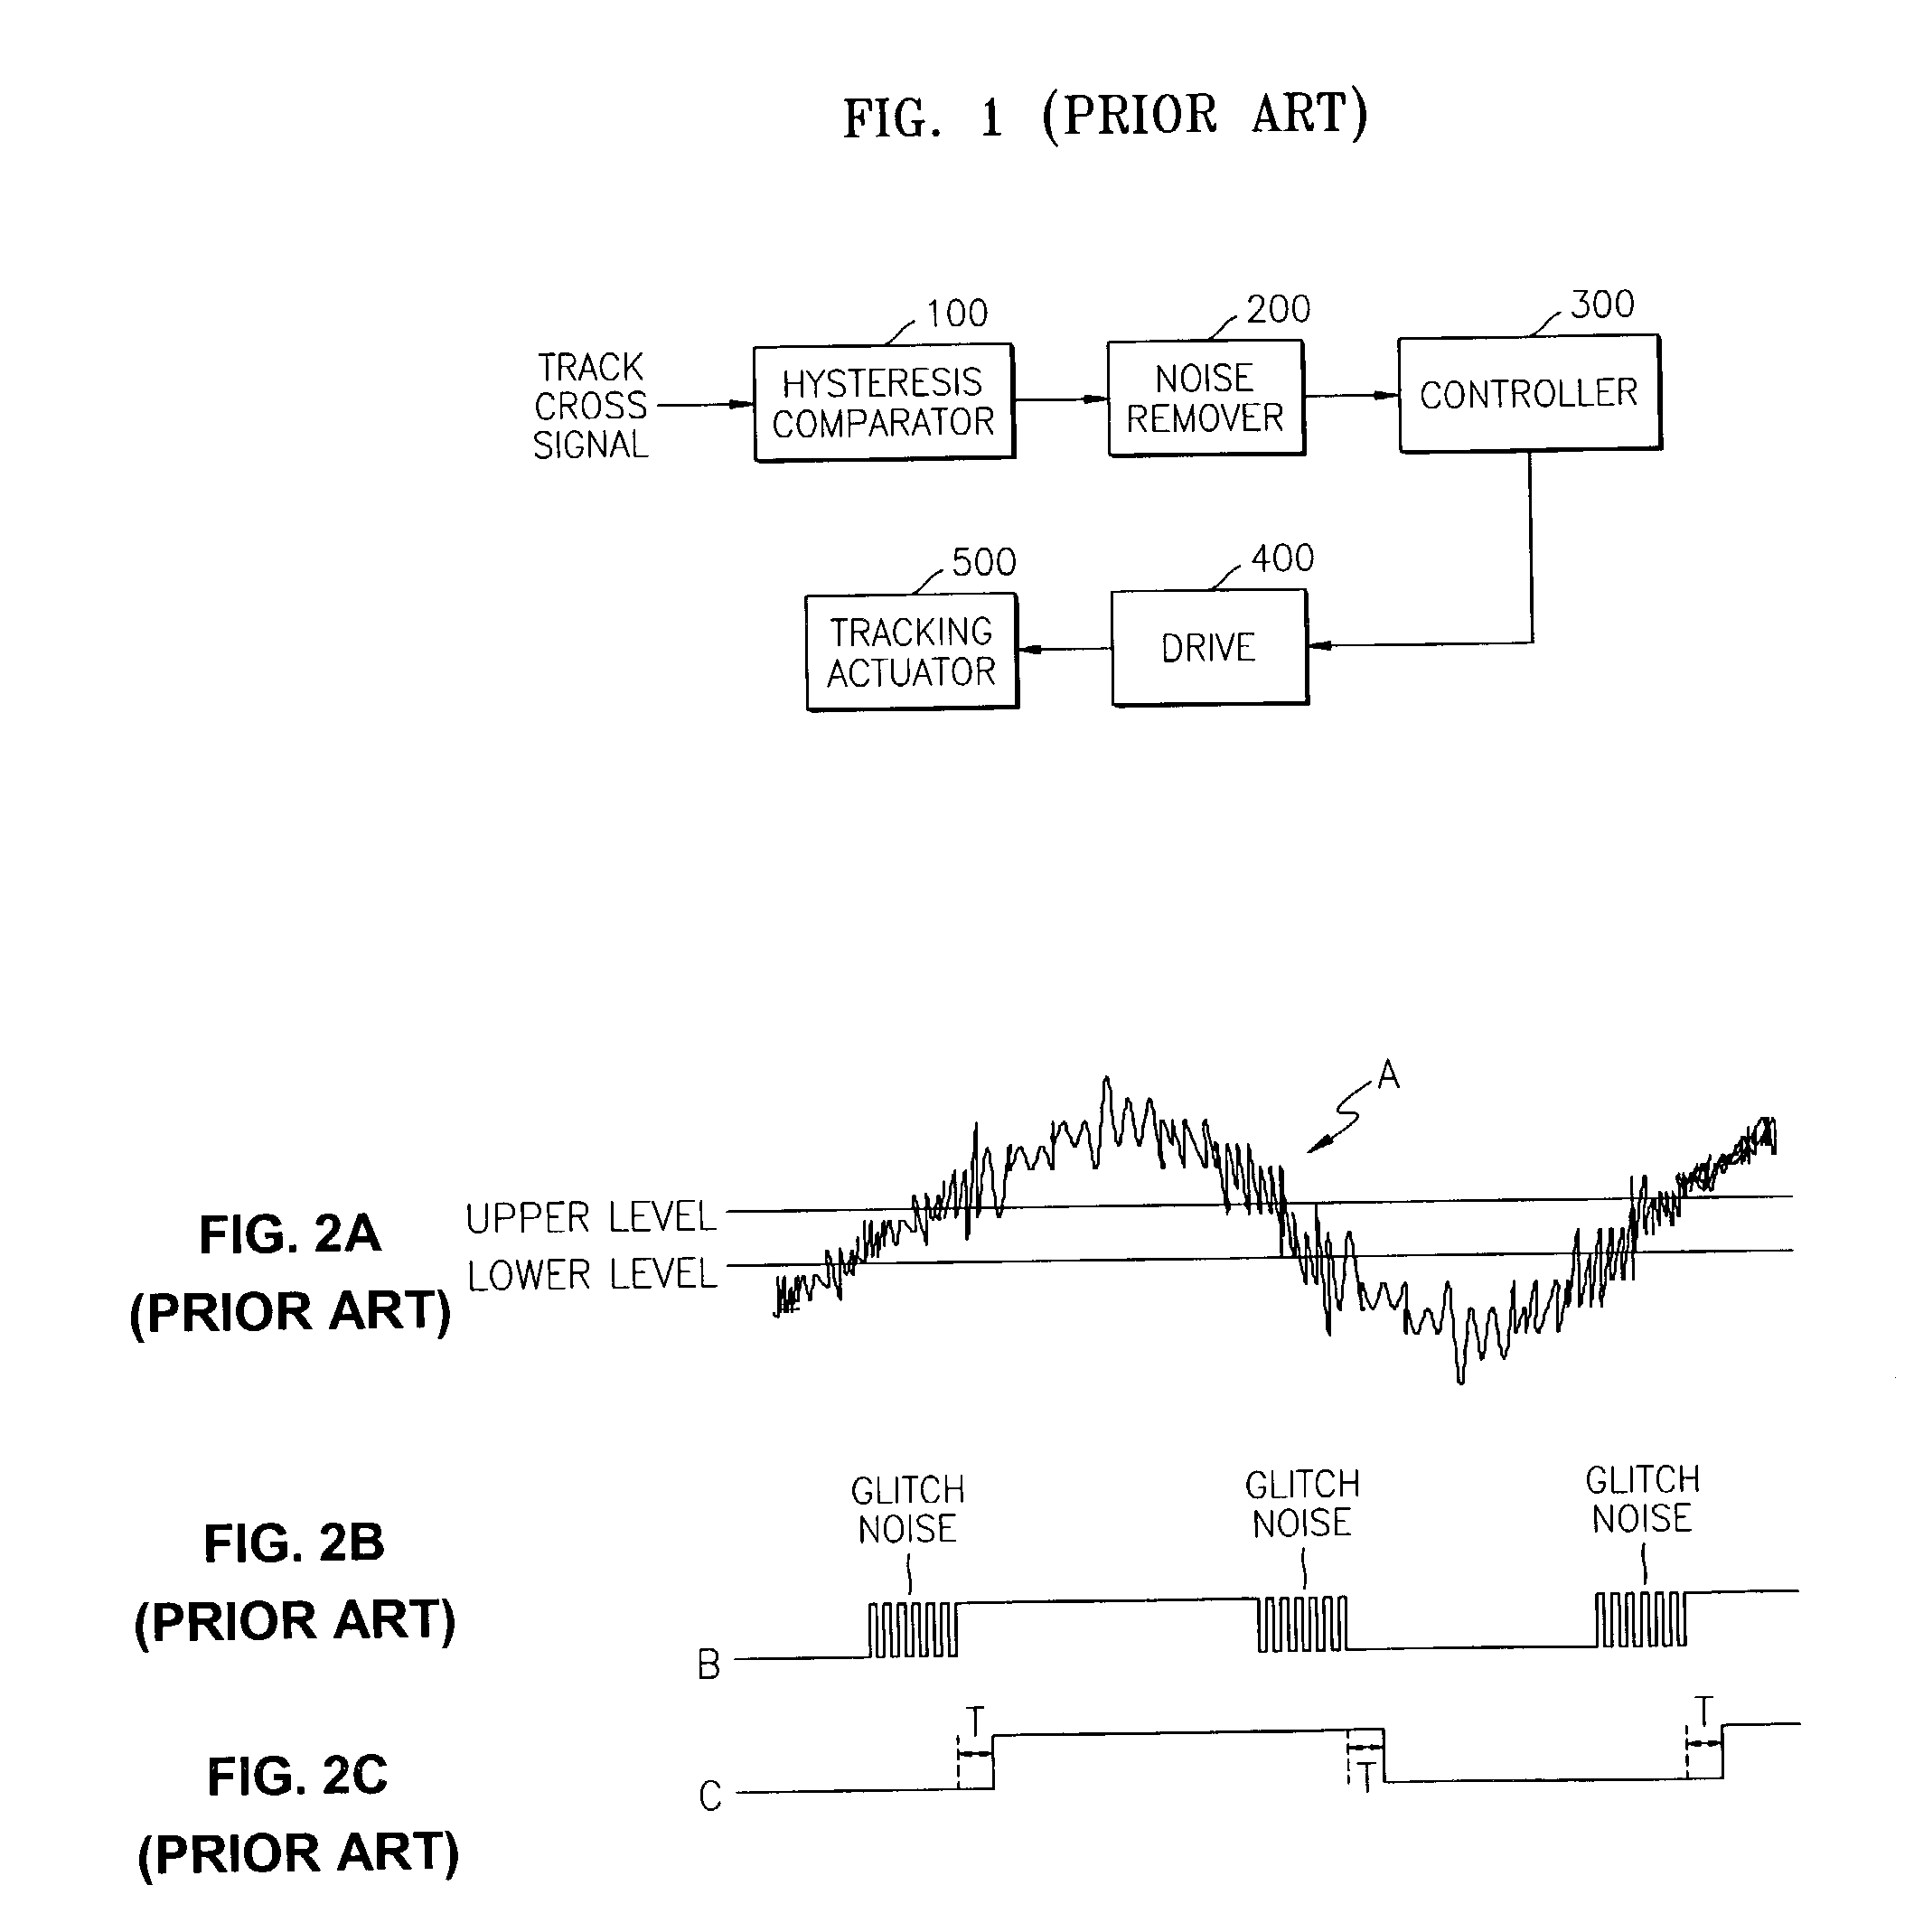 Method and apparatus for canceling glitch noise from track cross signal